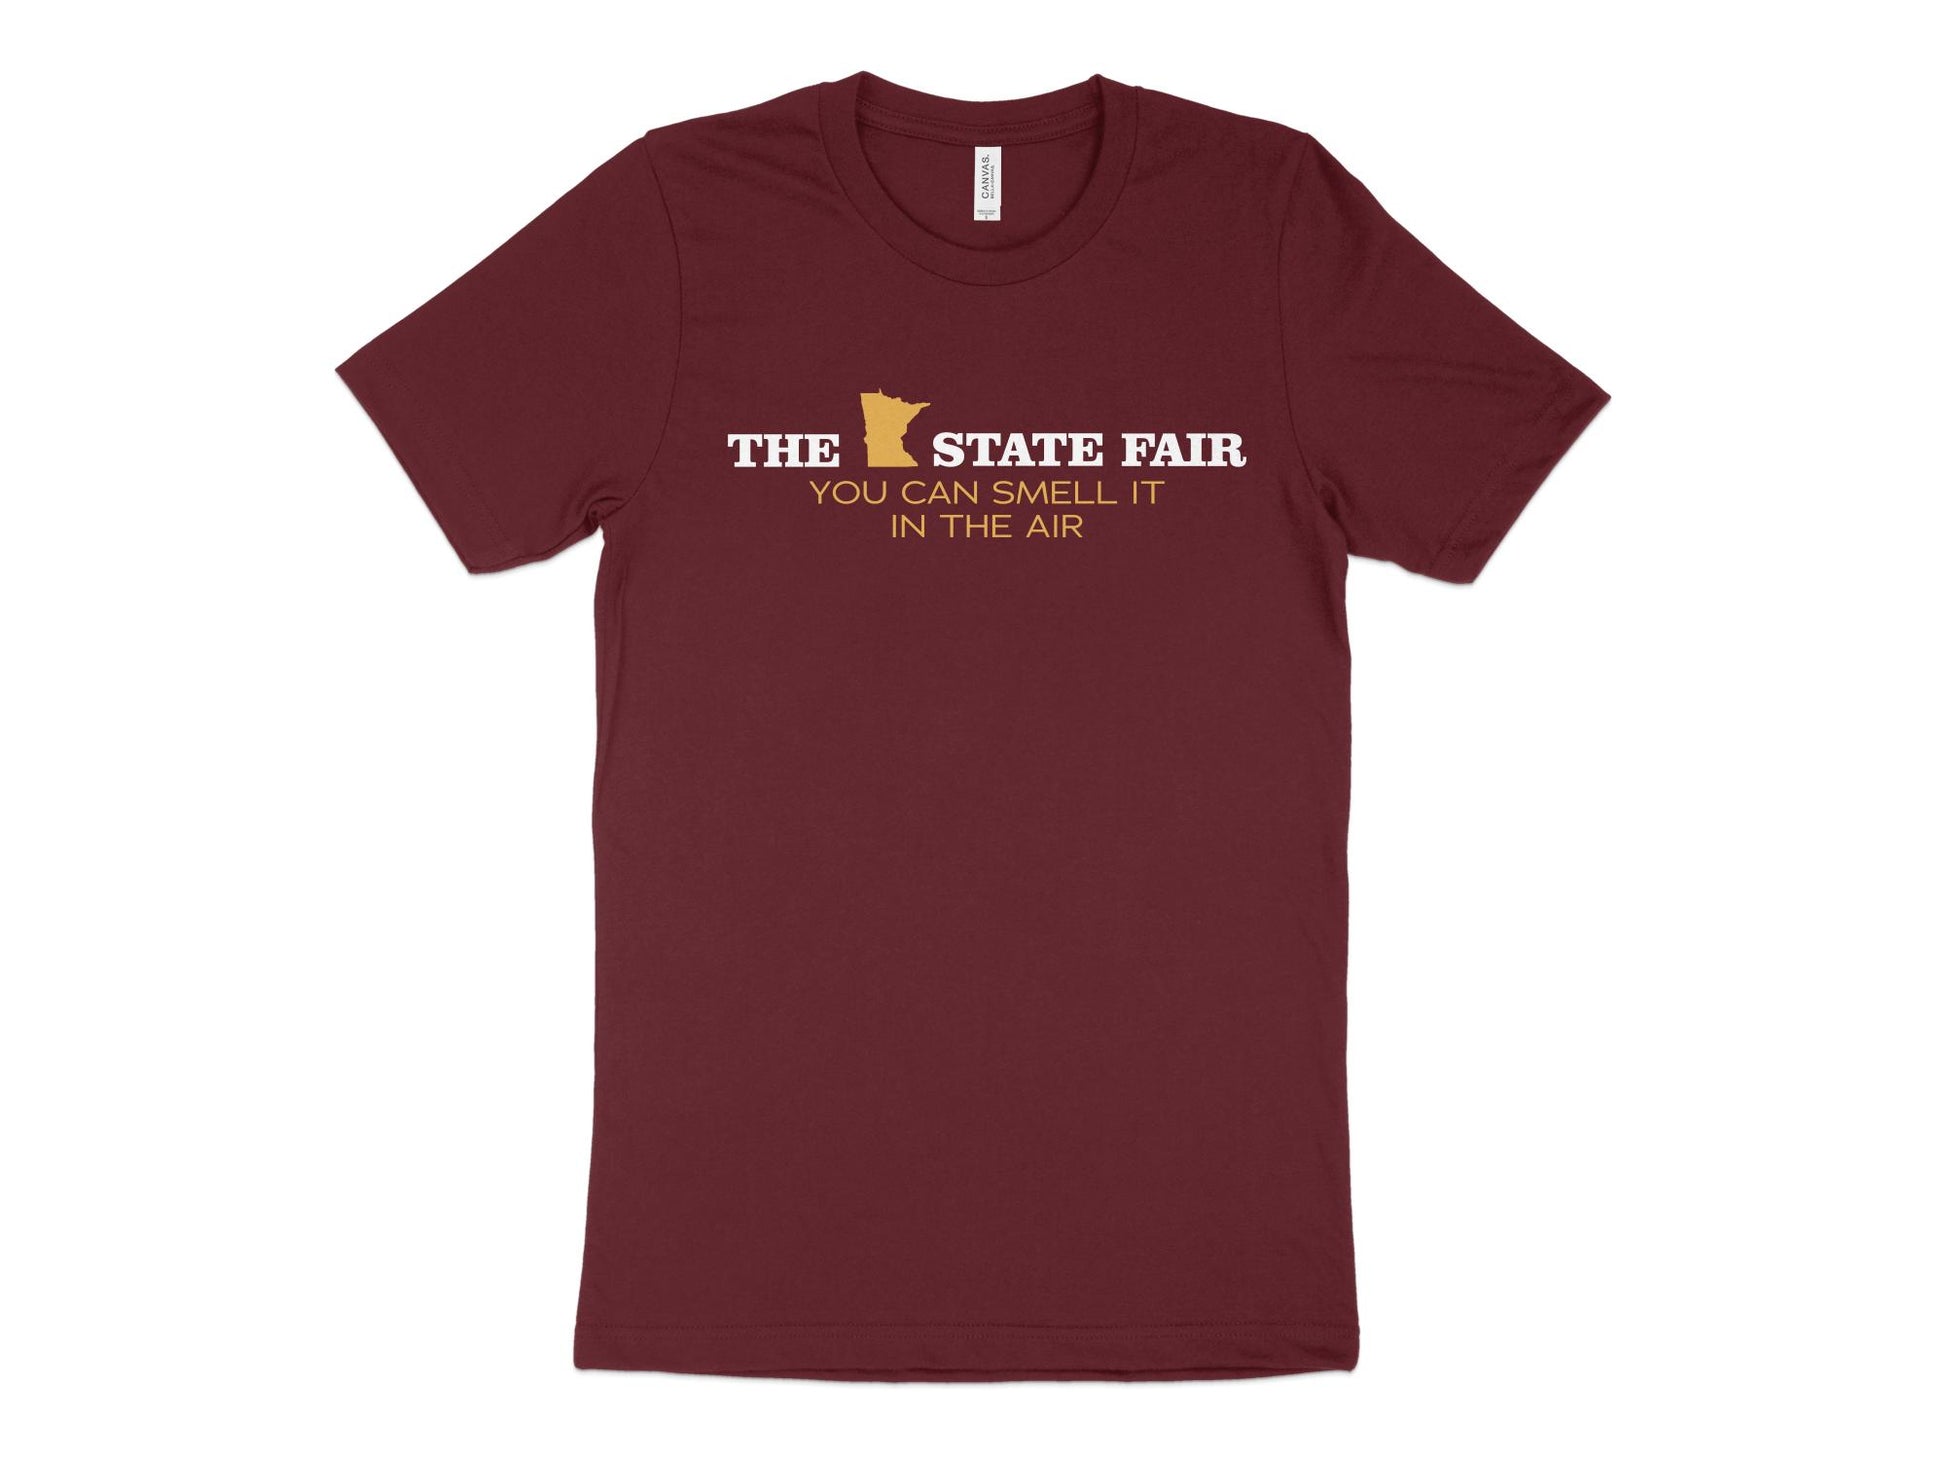 Minnesota State Fair Shirt - You Can Smell It in the Air, maroon